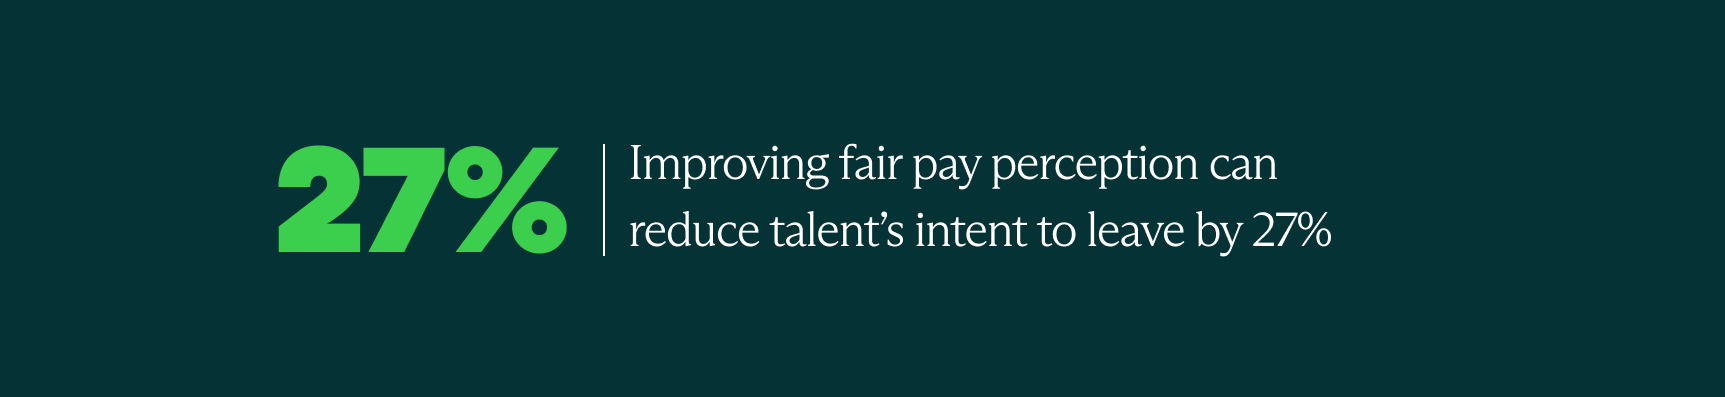 Improving fair pay perception can reduce talent’s intent to leave by 27%